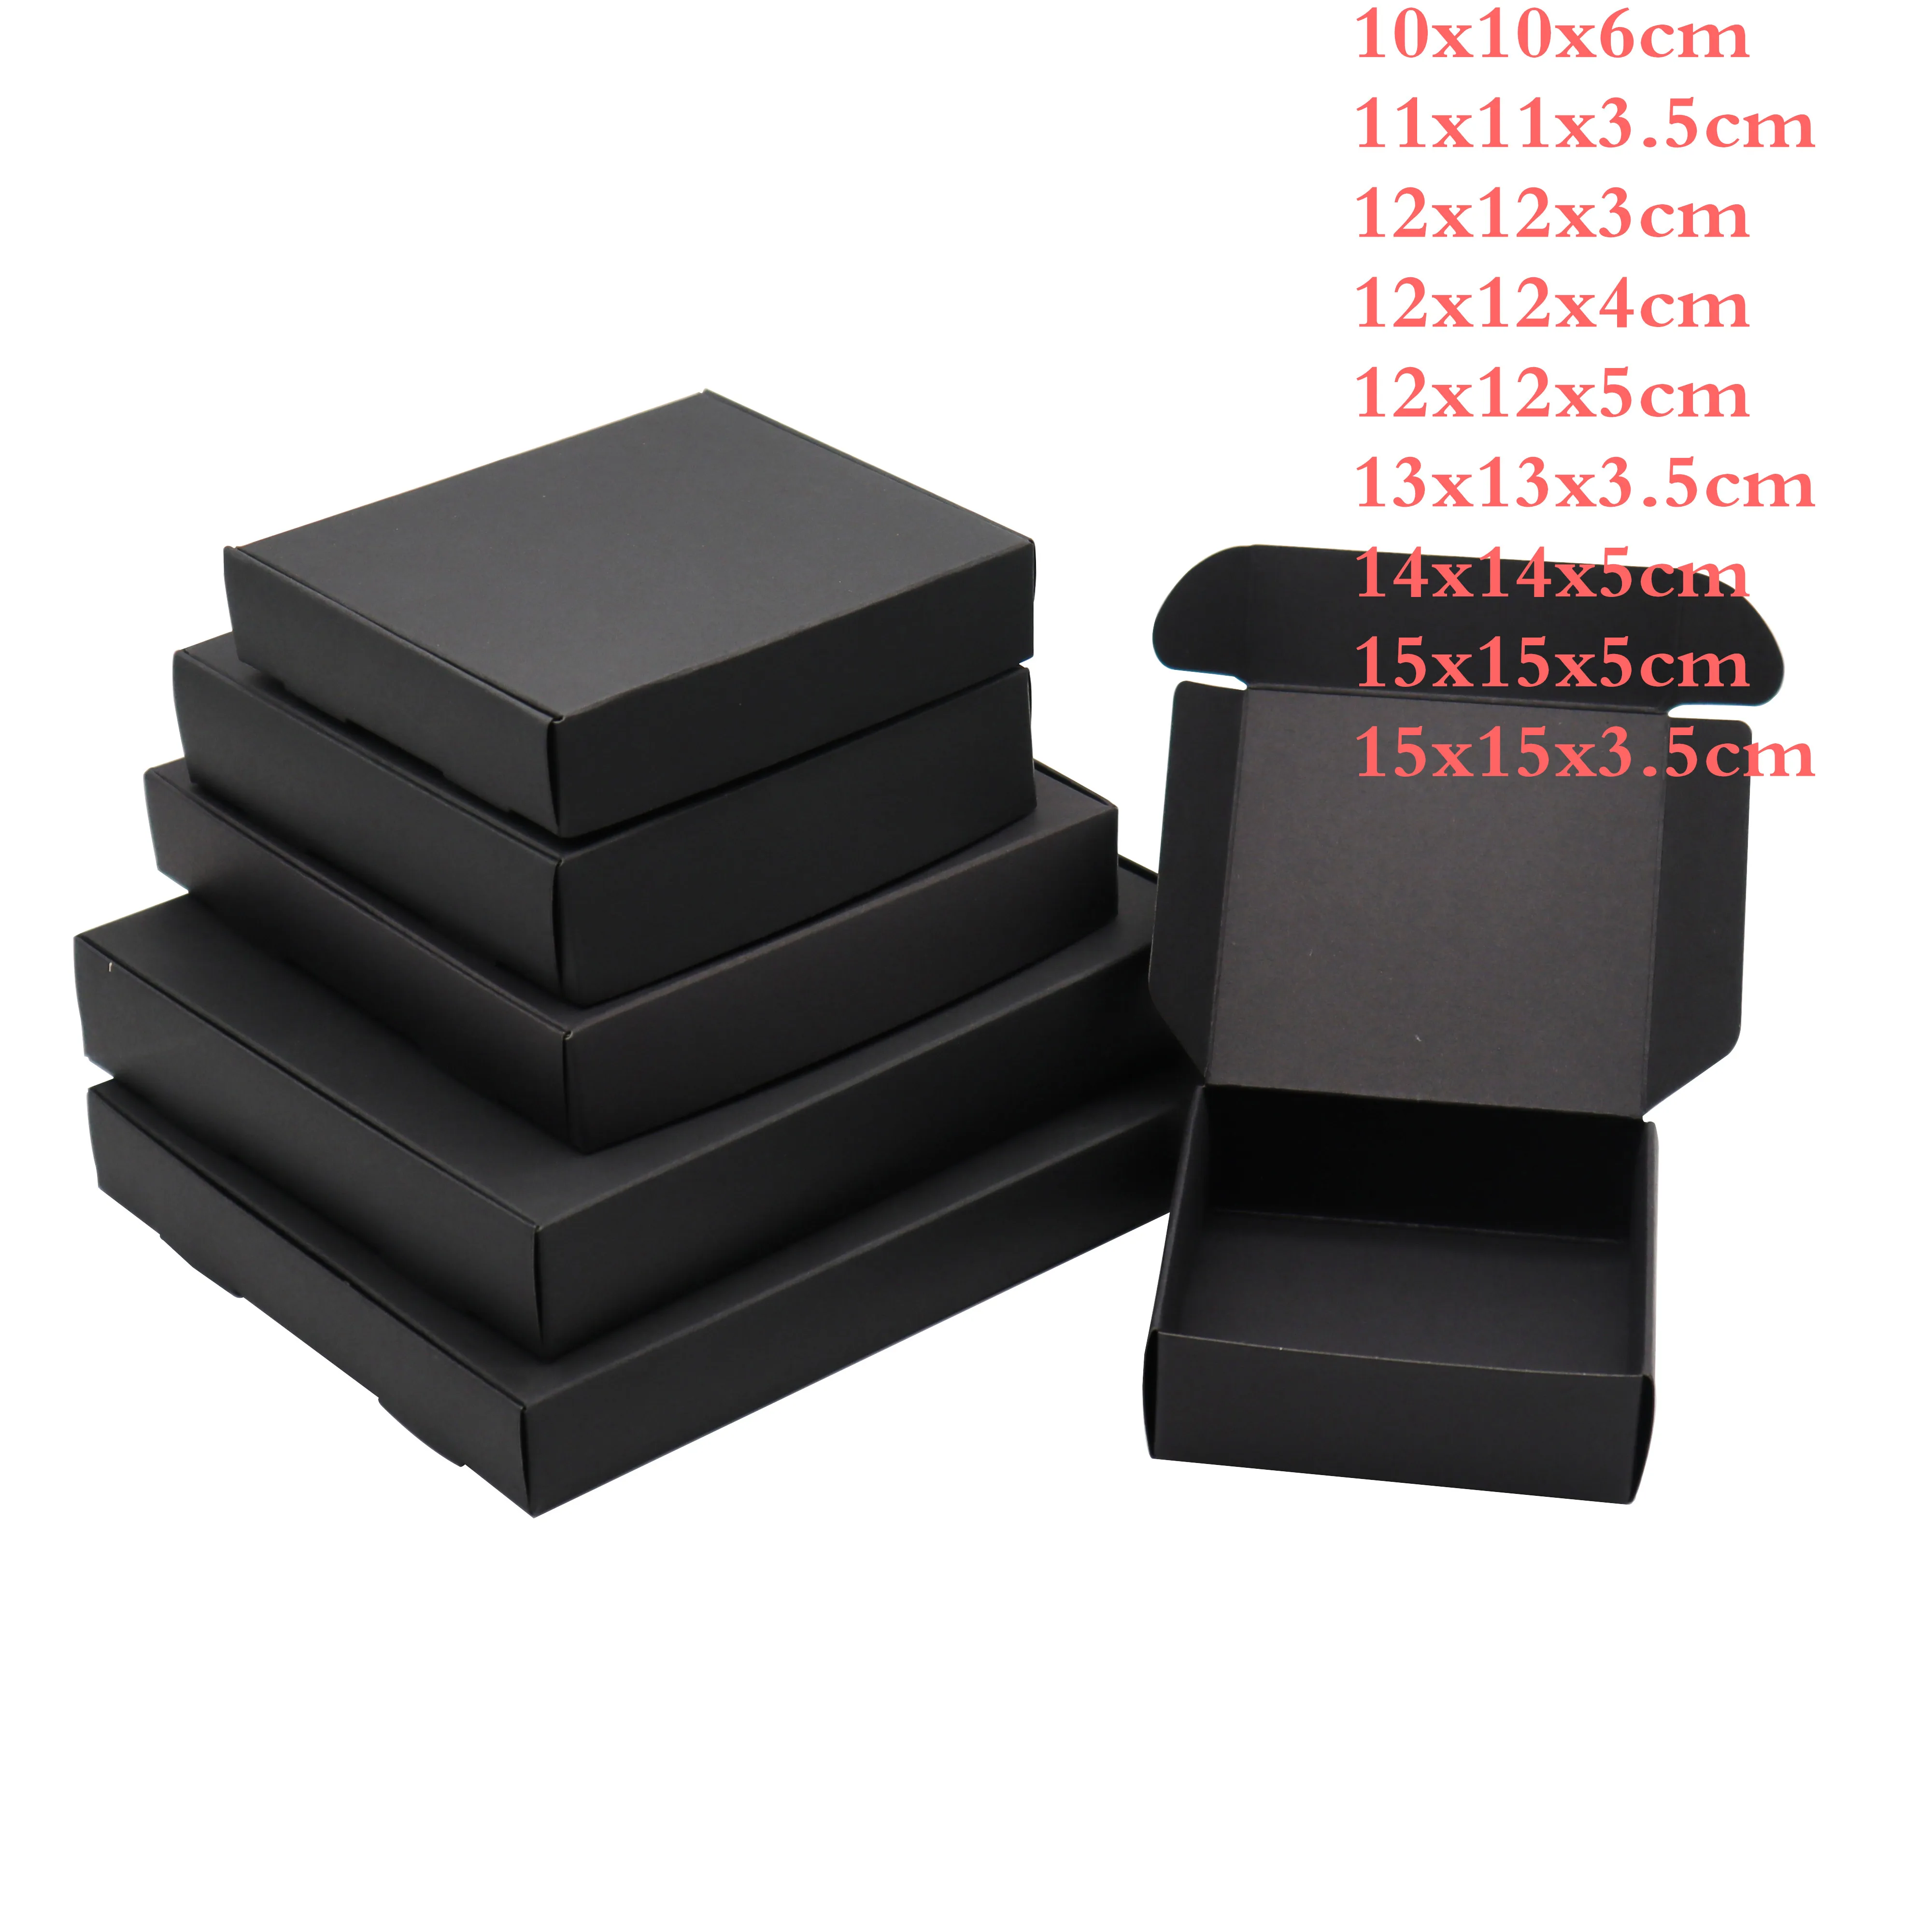 

50Pcs/ Multi-size Square black Paper Gift Box Handmade Soap Box Jewelry Cookies Gift Candy Box Wedding Gift Box Party Supplies